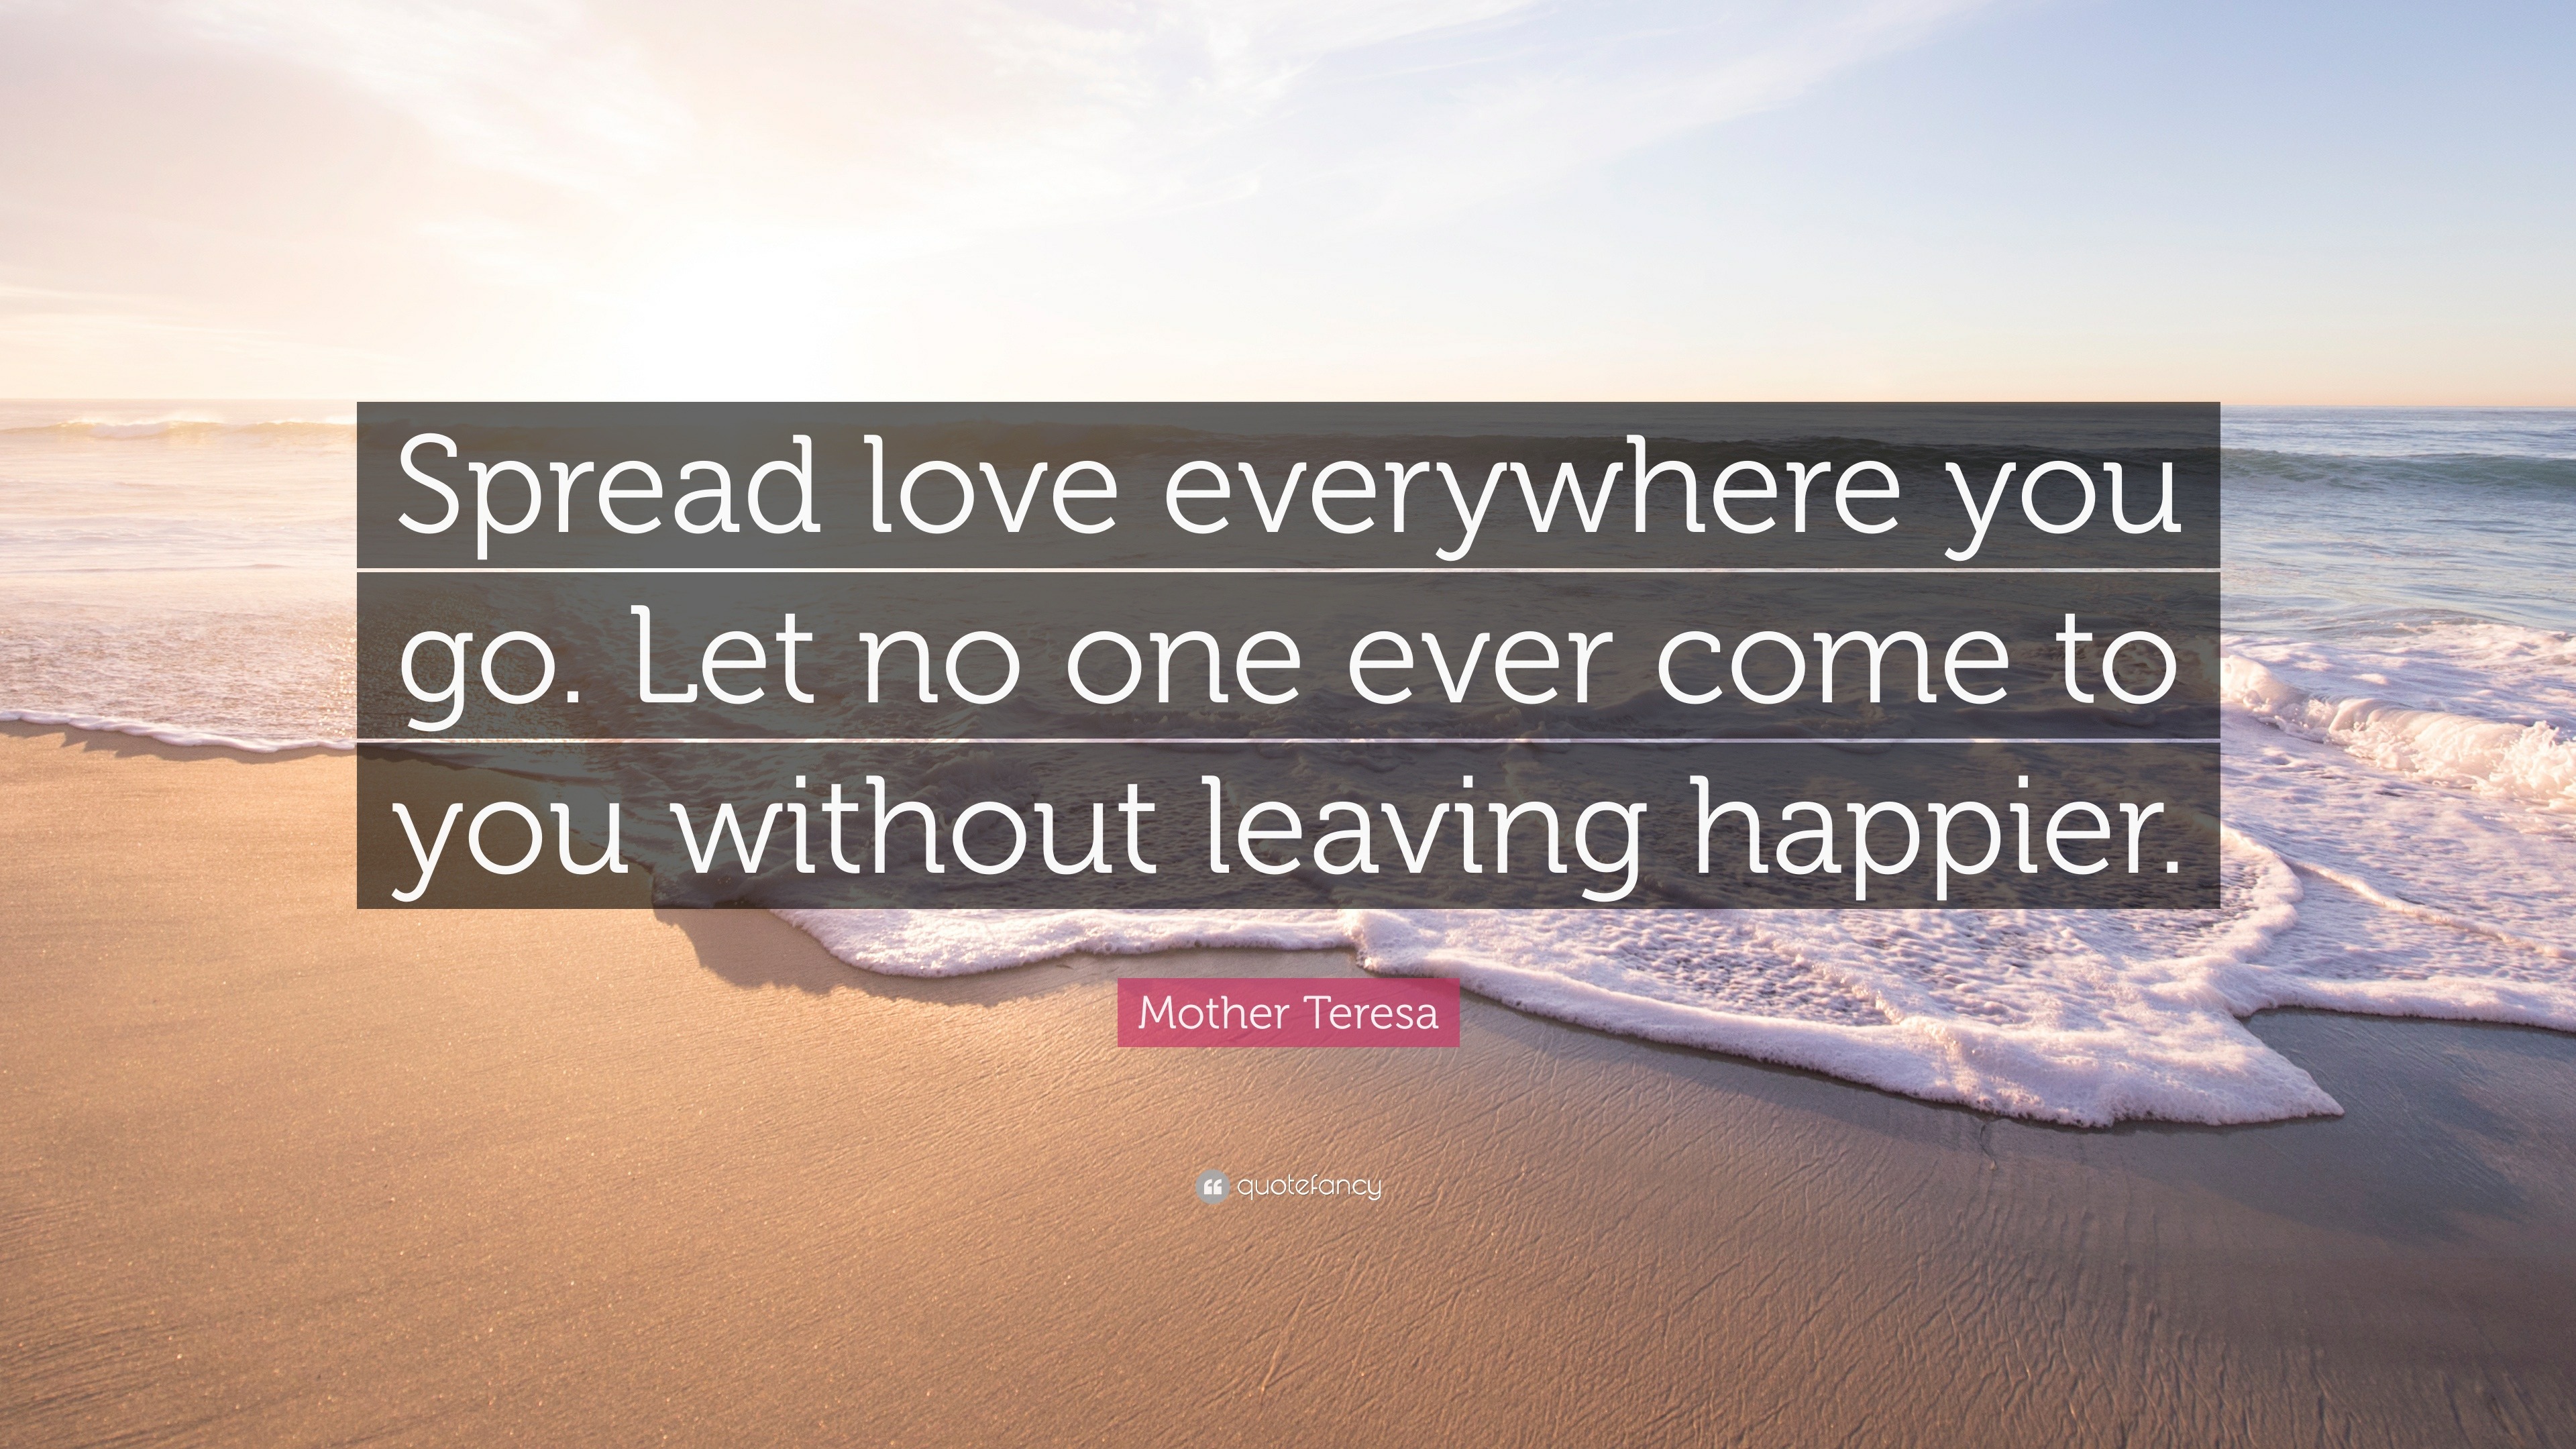 Mother Teresa Quote “Spread love everywhere you go Let no one ever e